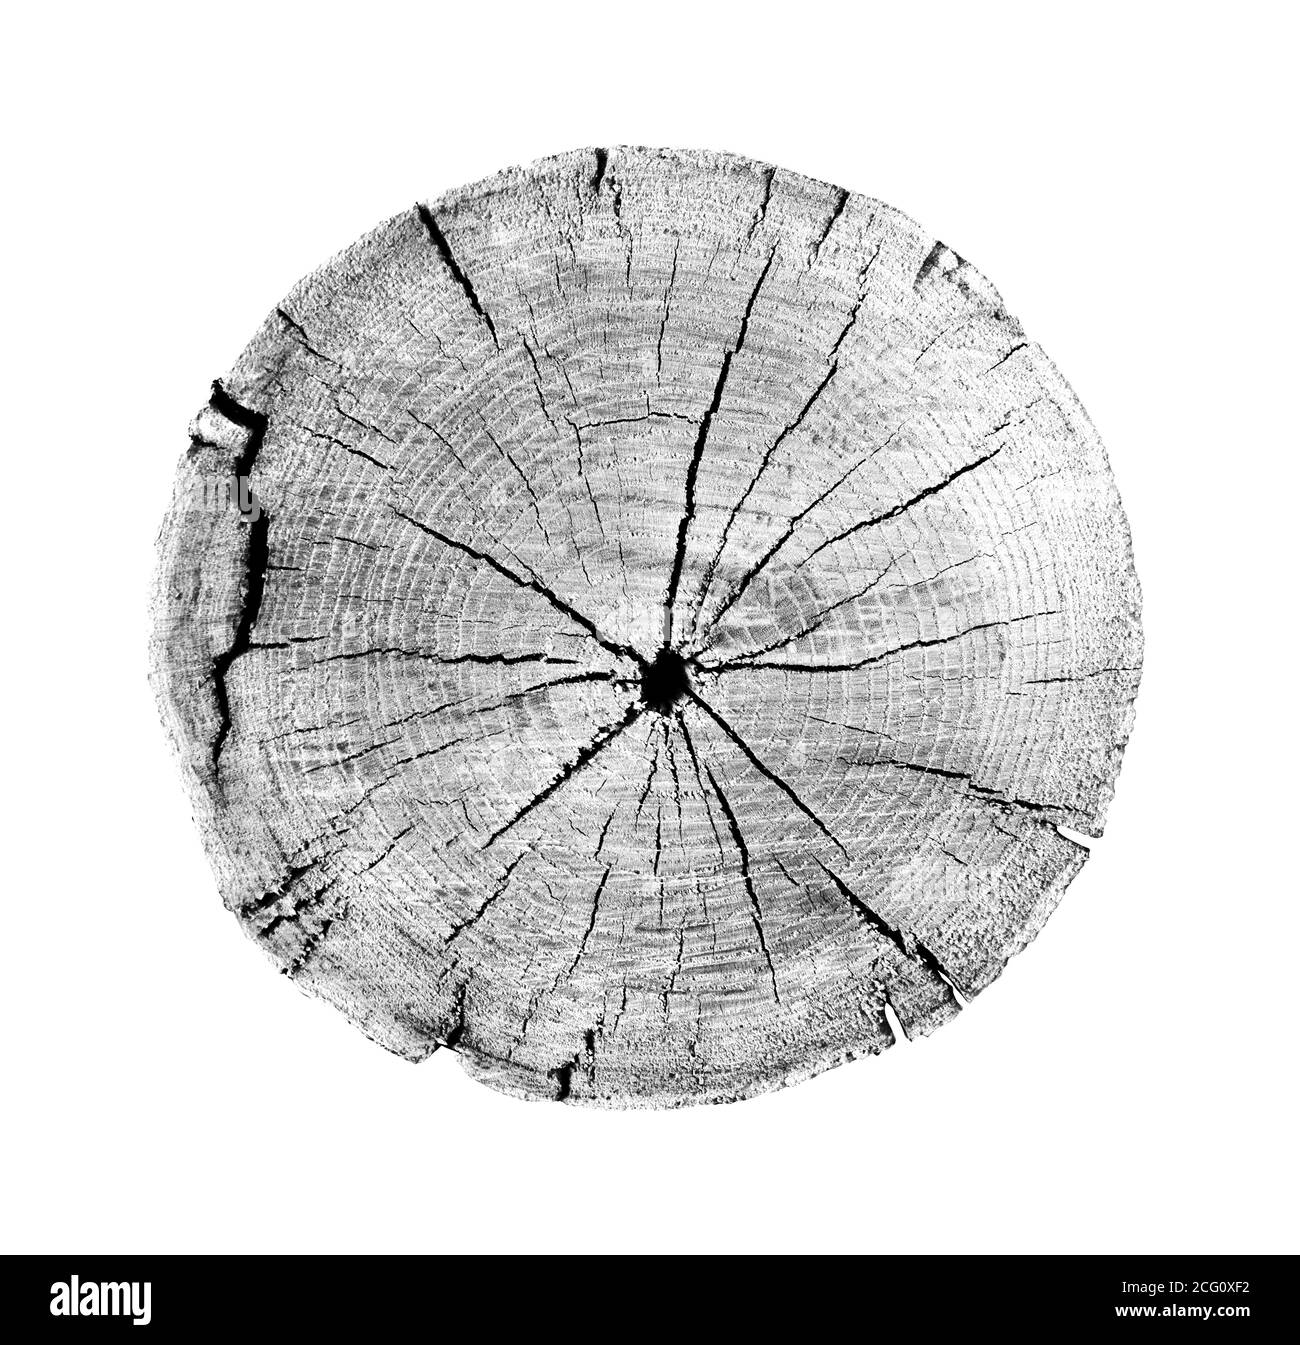 Large piece of round wood with growth rings on a white background. Black and white felled tree trunk cut from the woods. Detailed natural organic text Stock Photo